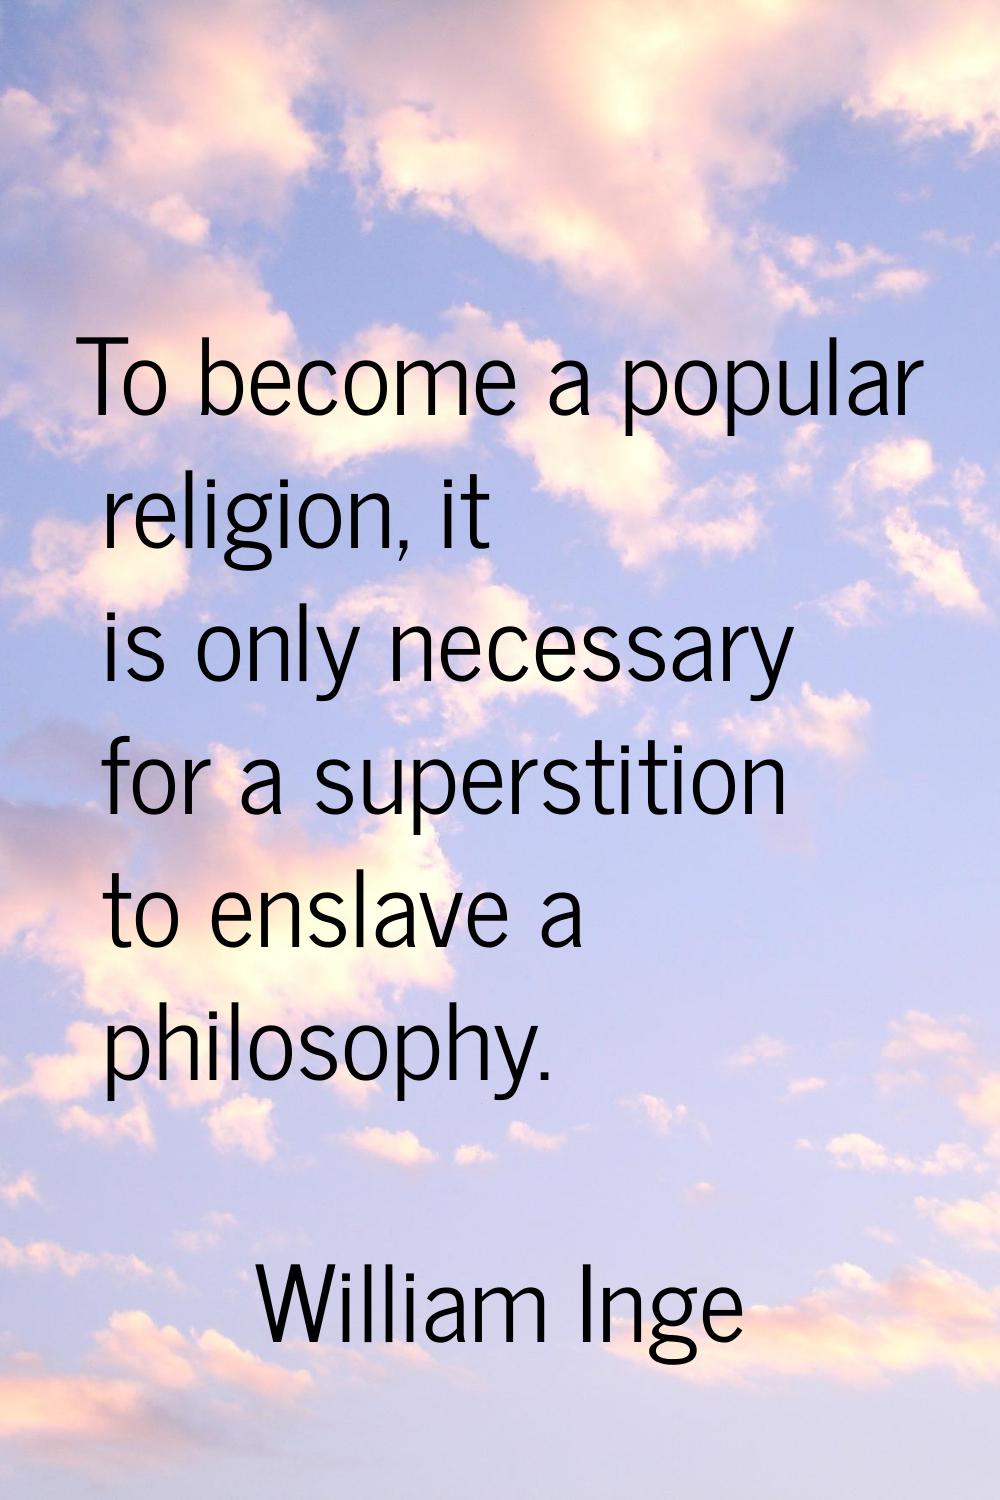 To become a popular religion, it is only necessary for a superstition to enslave a philosophy.